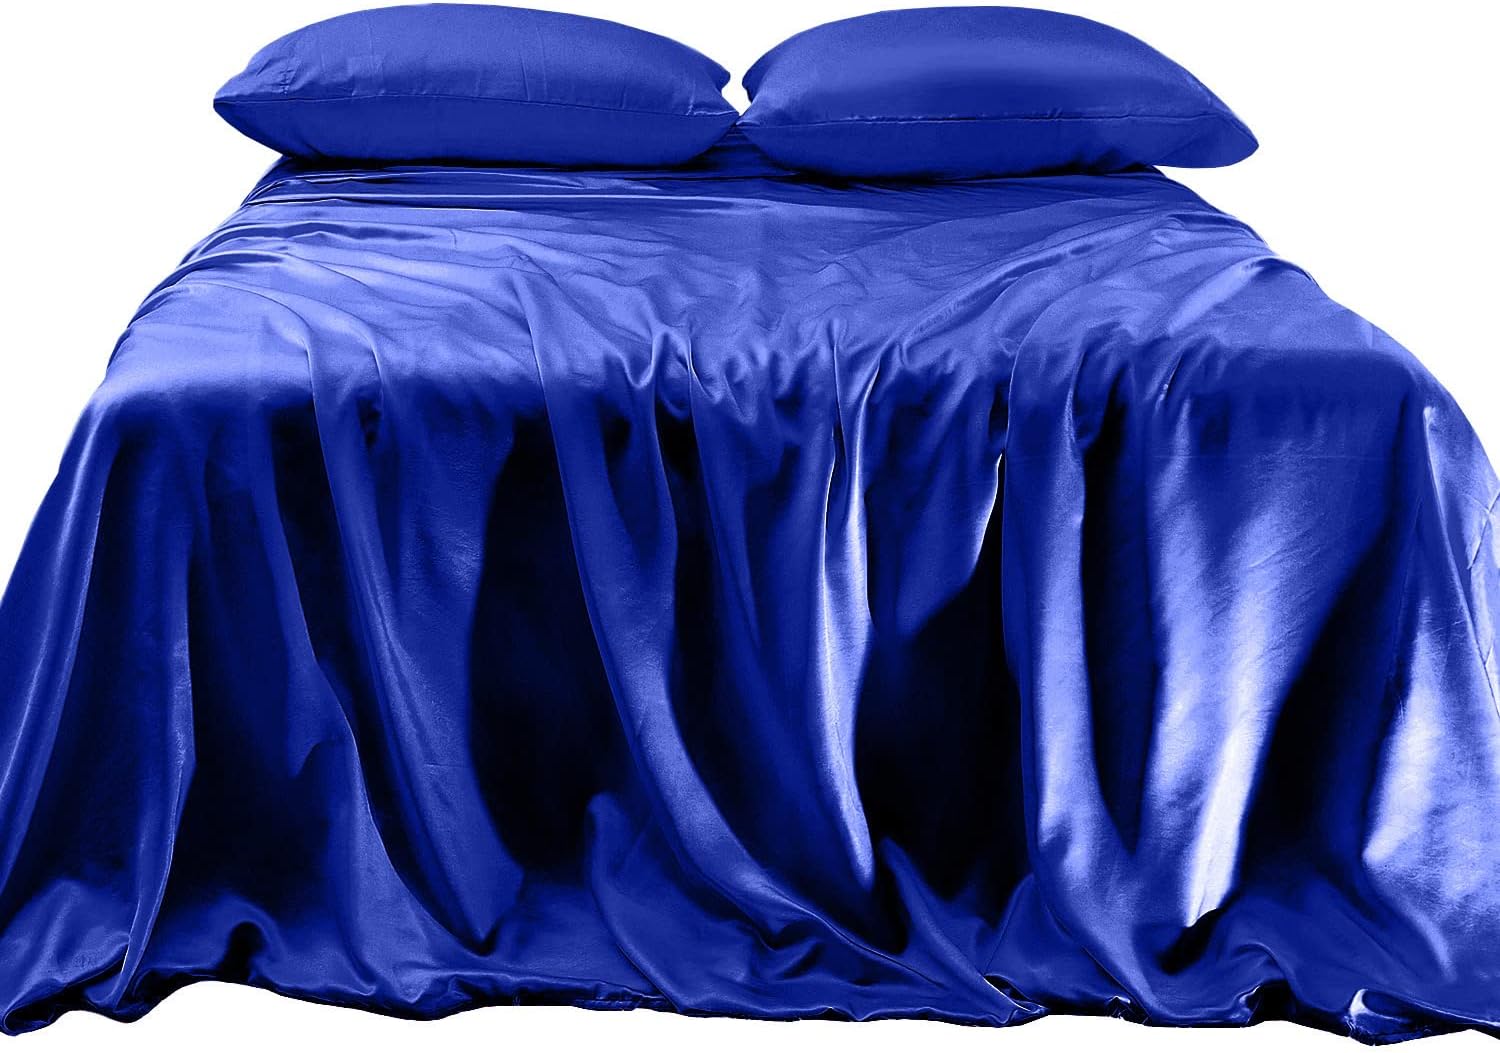 Elegant Comfort Luxurious 4-Piece Silky Satin Sheet Set, Skin and Hair Friendly, Wrinkle, Fade, Stain Resistant with Deep Pockets Fitted Sheet, Cooling Soft Satin Sheet Set, Queen, Royal Blue